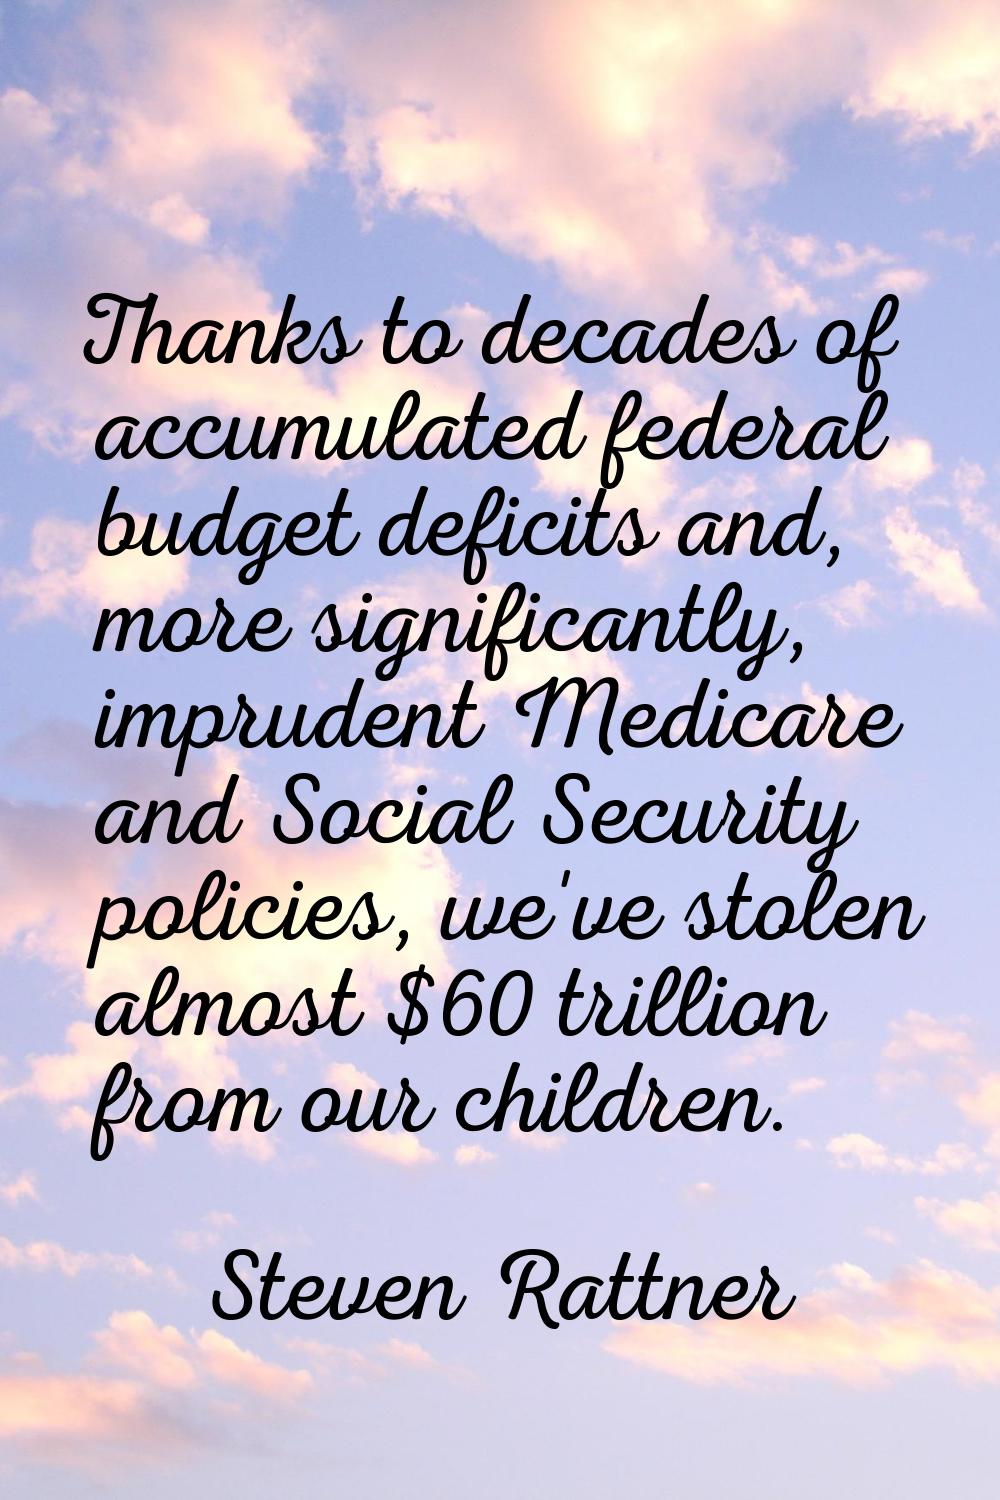 Thanks to decades of accumulated federal budget deficits and, more significantly, imprudent Medicar